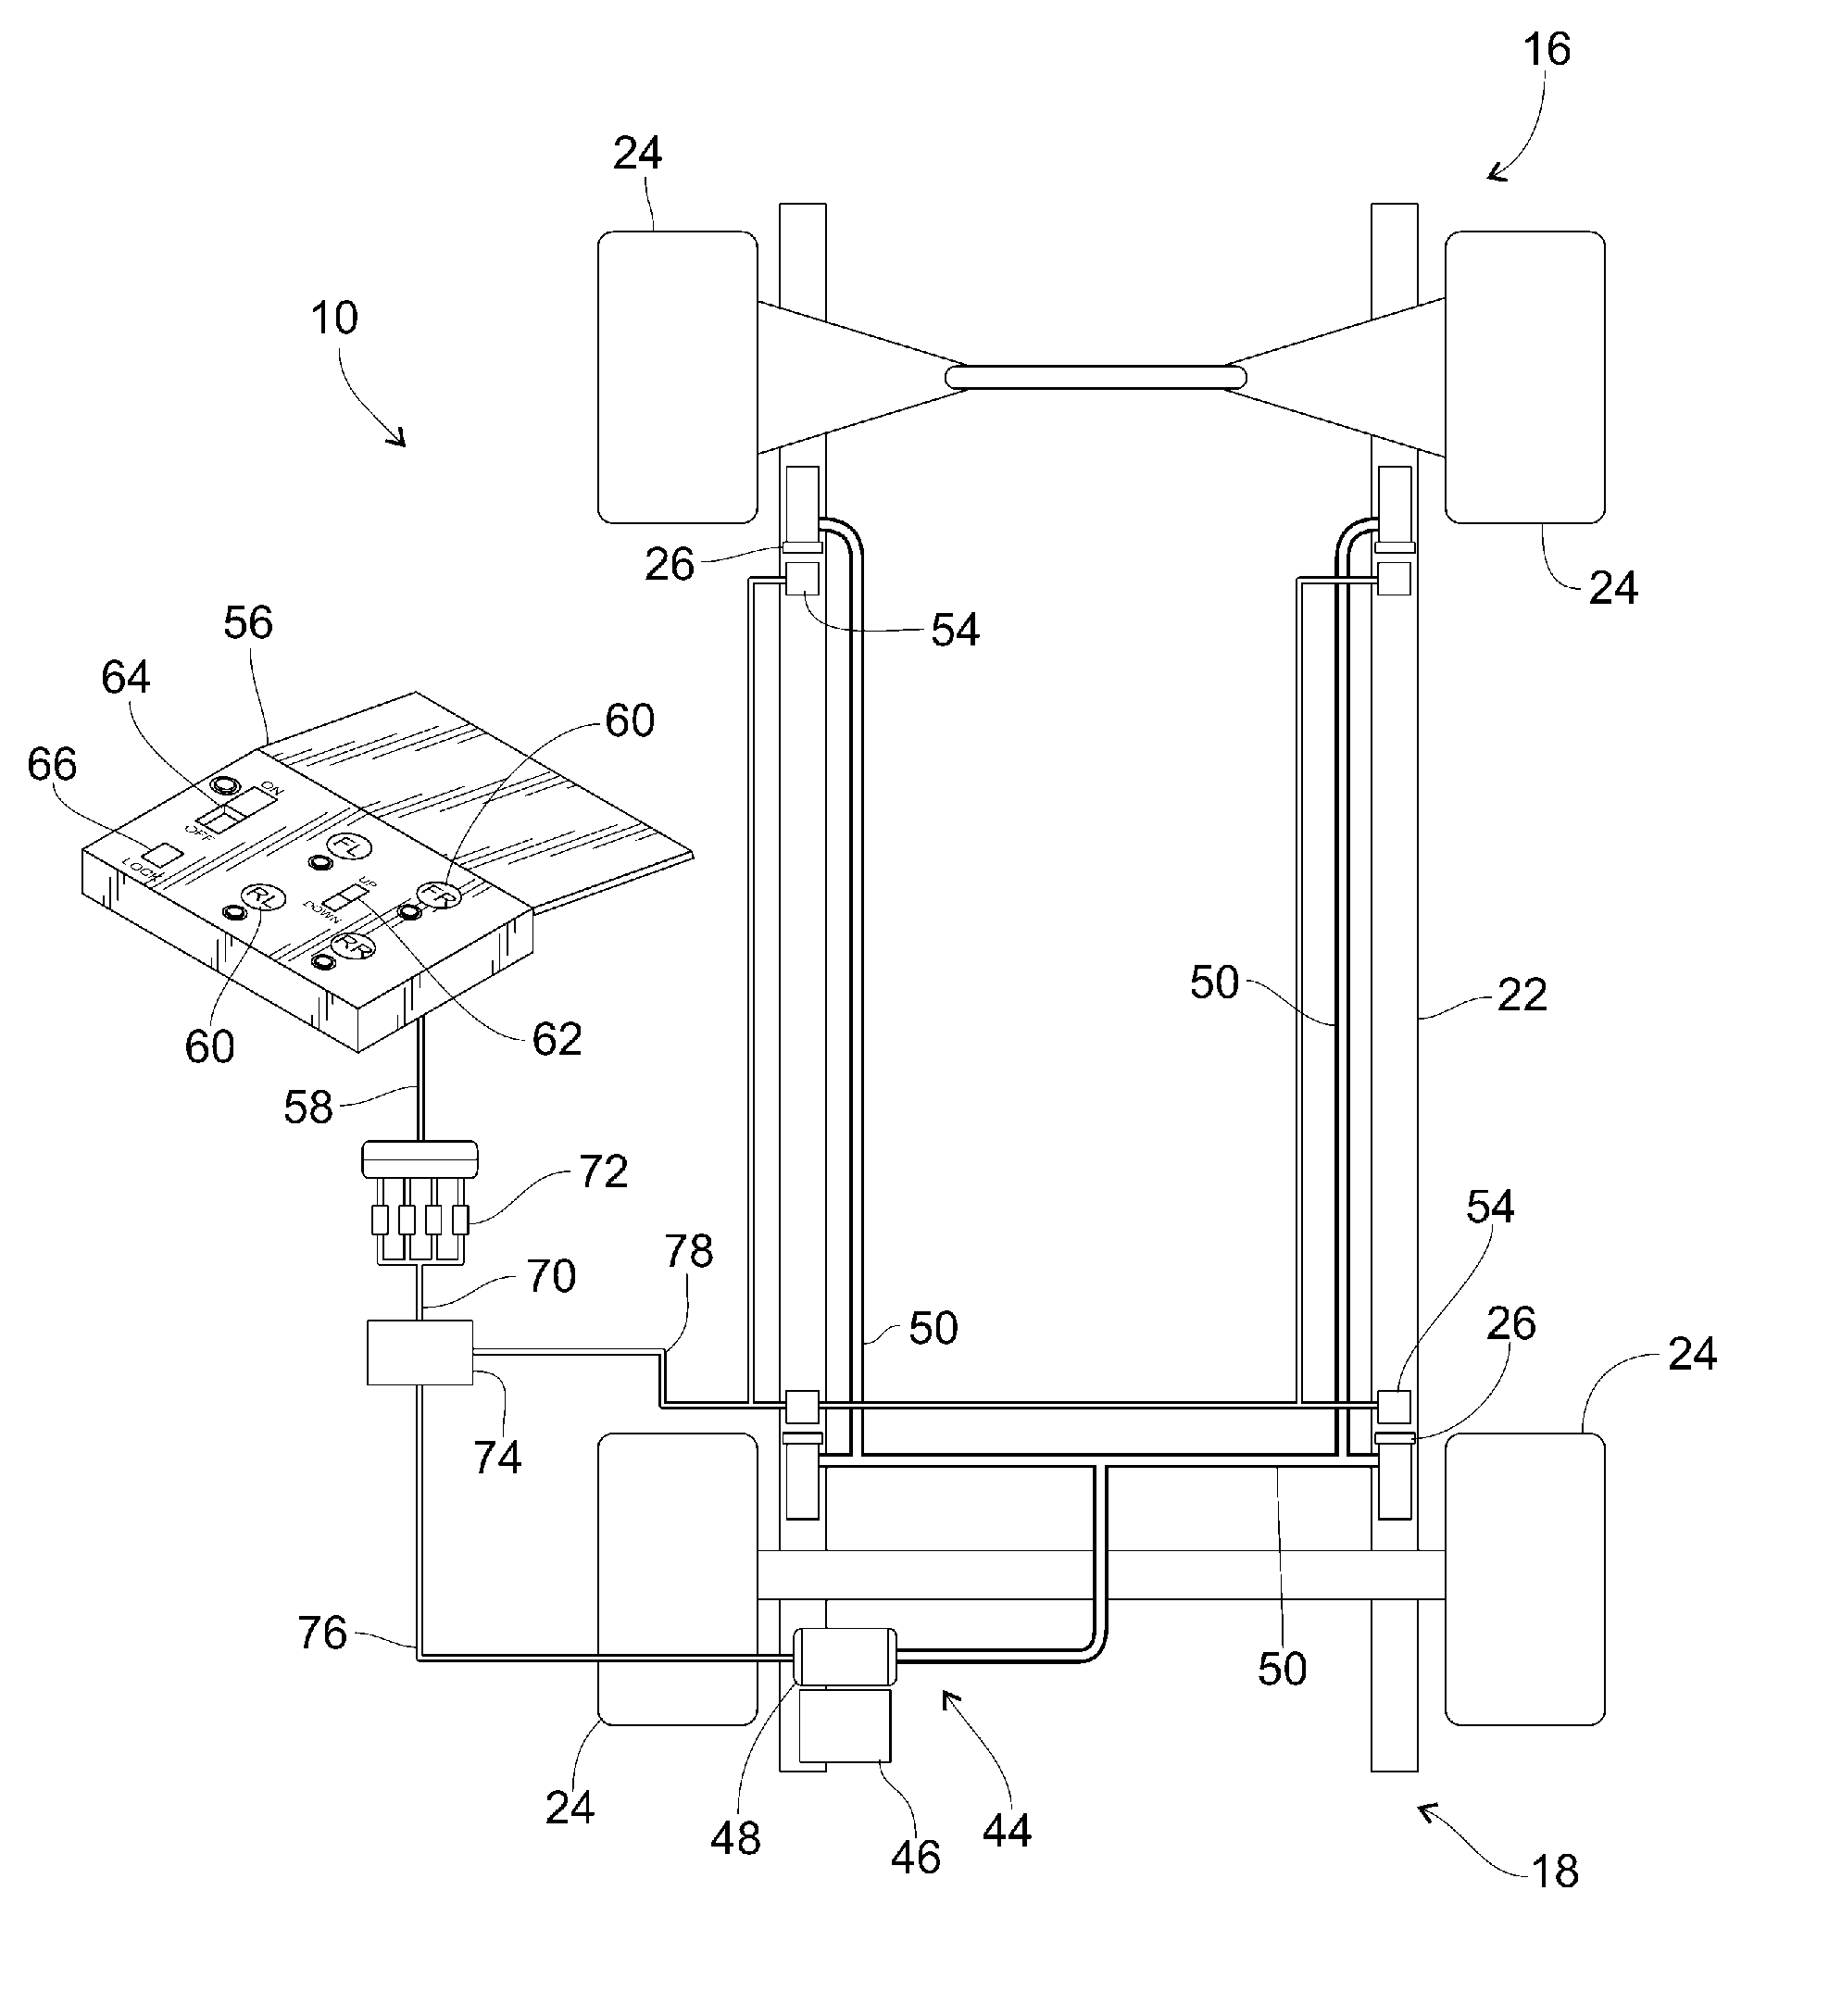 Automatic jacking system for an automotive vehicle